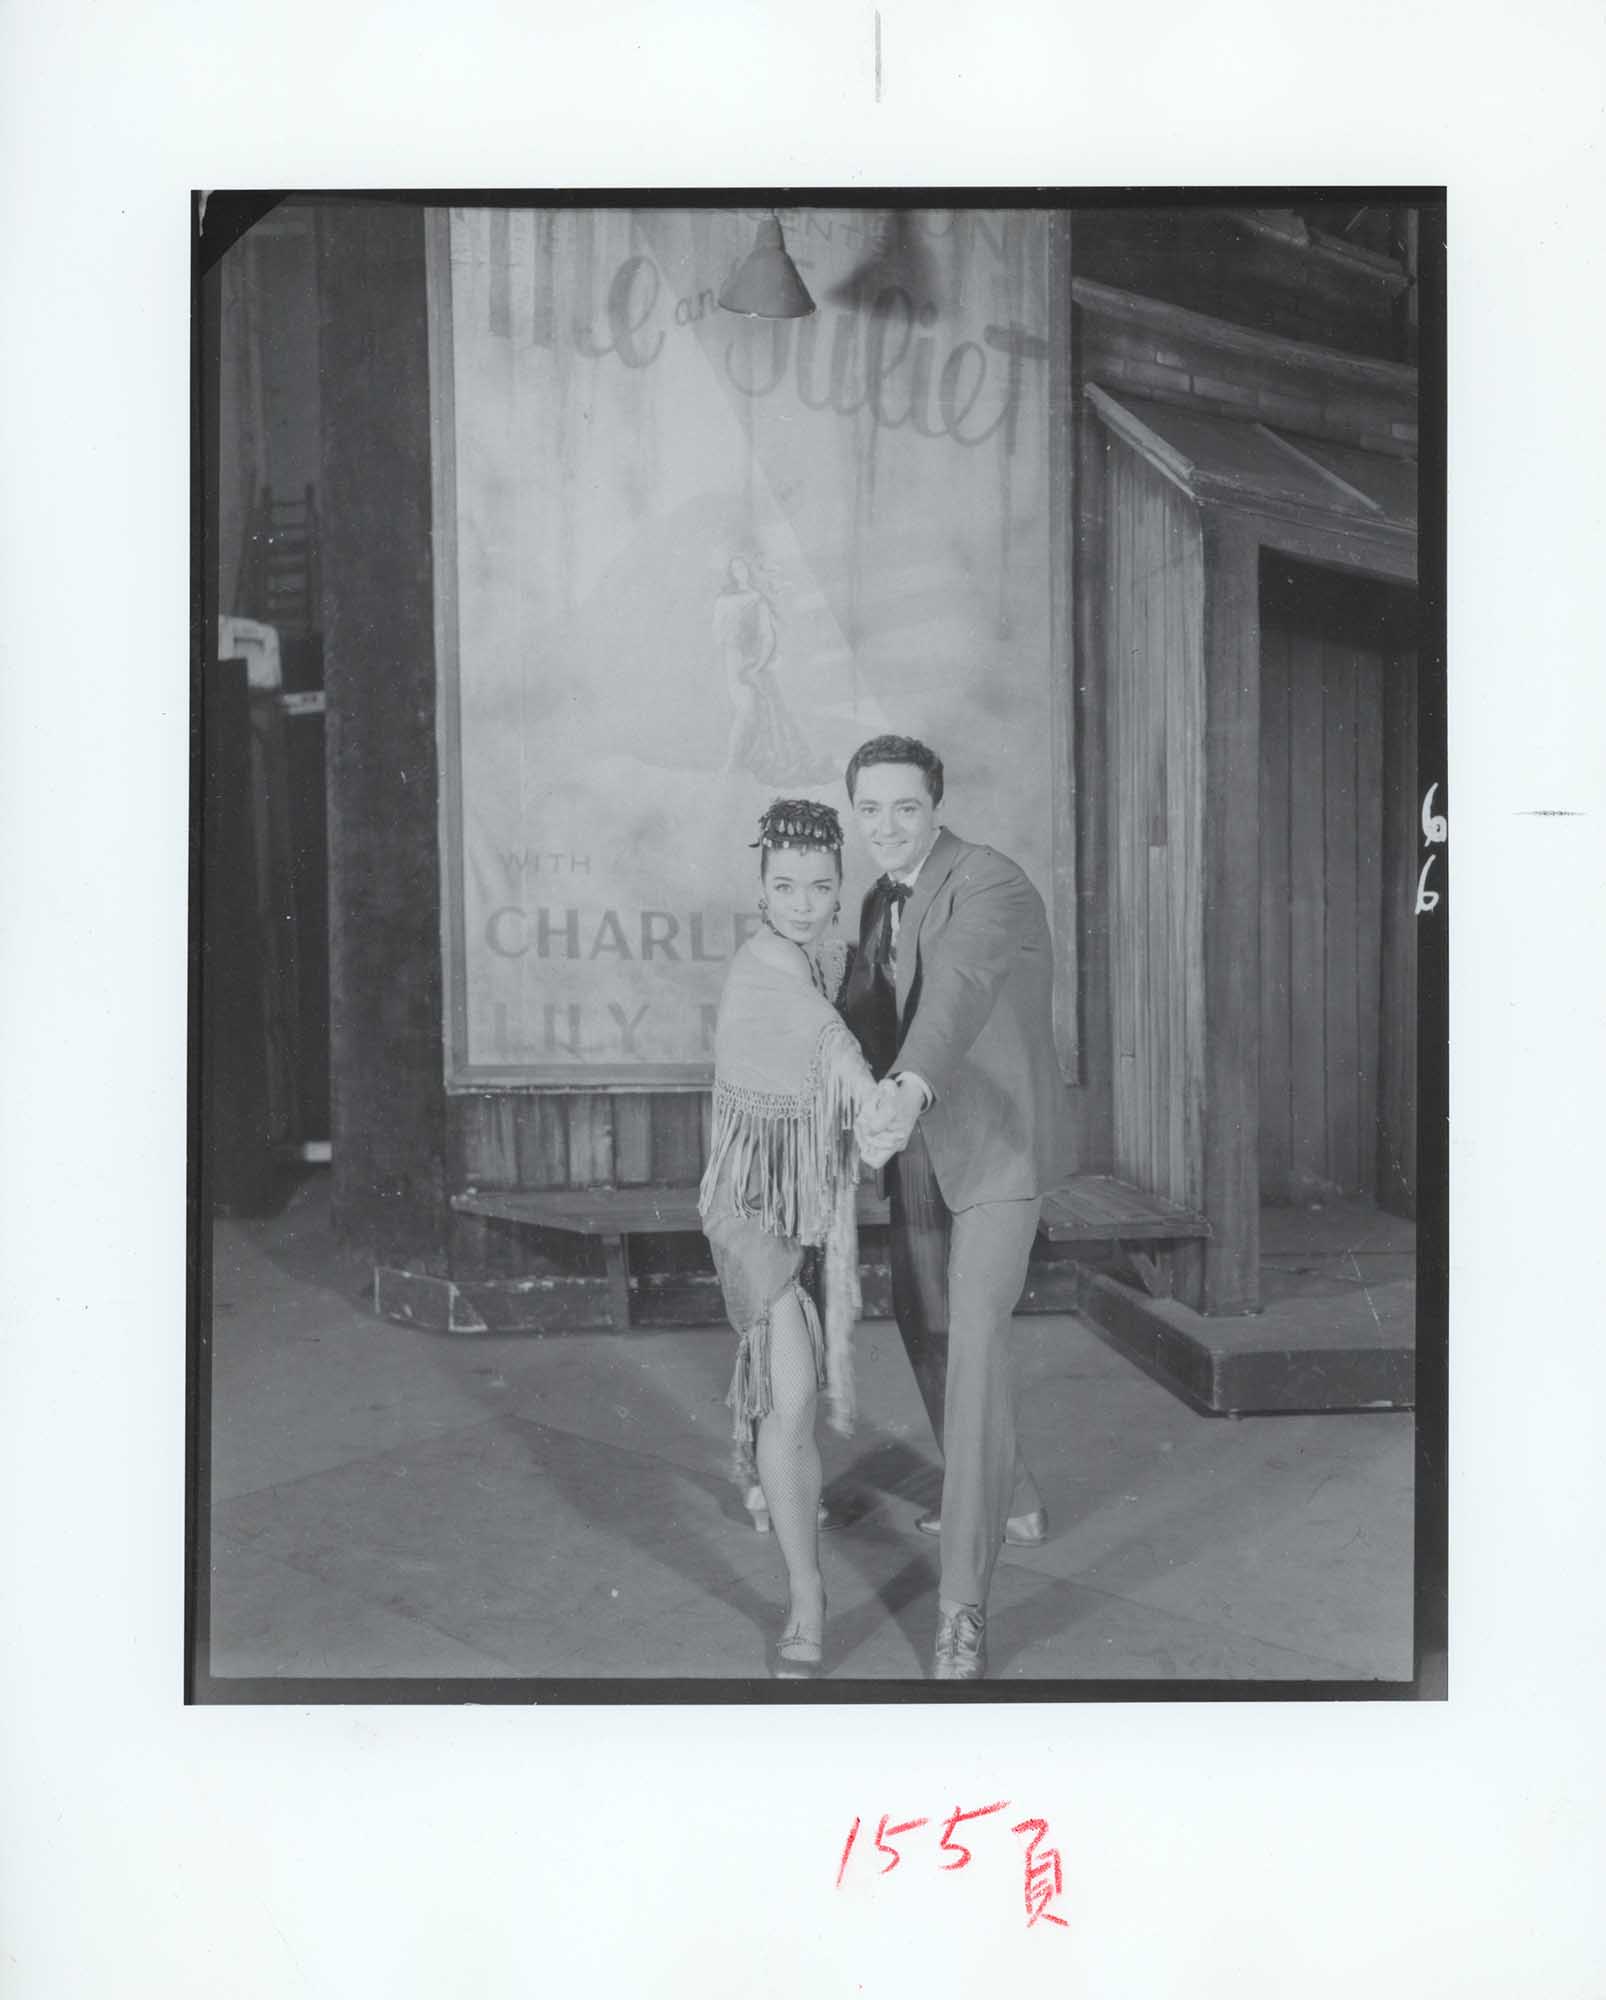 A photo from the 1953 Broadway production of Me and Juliet.